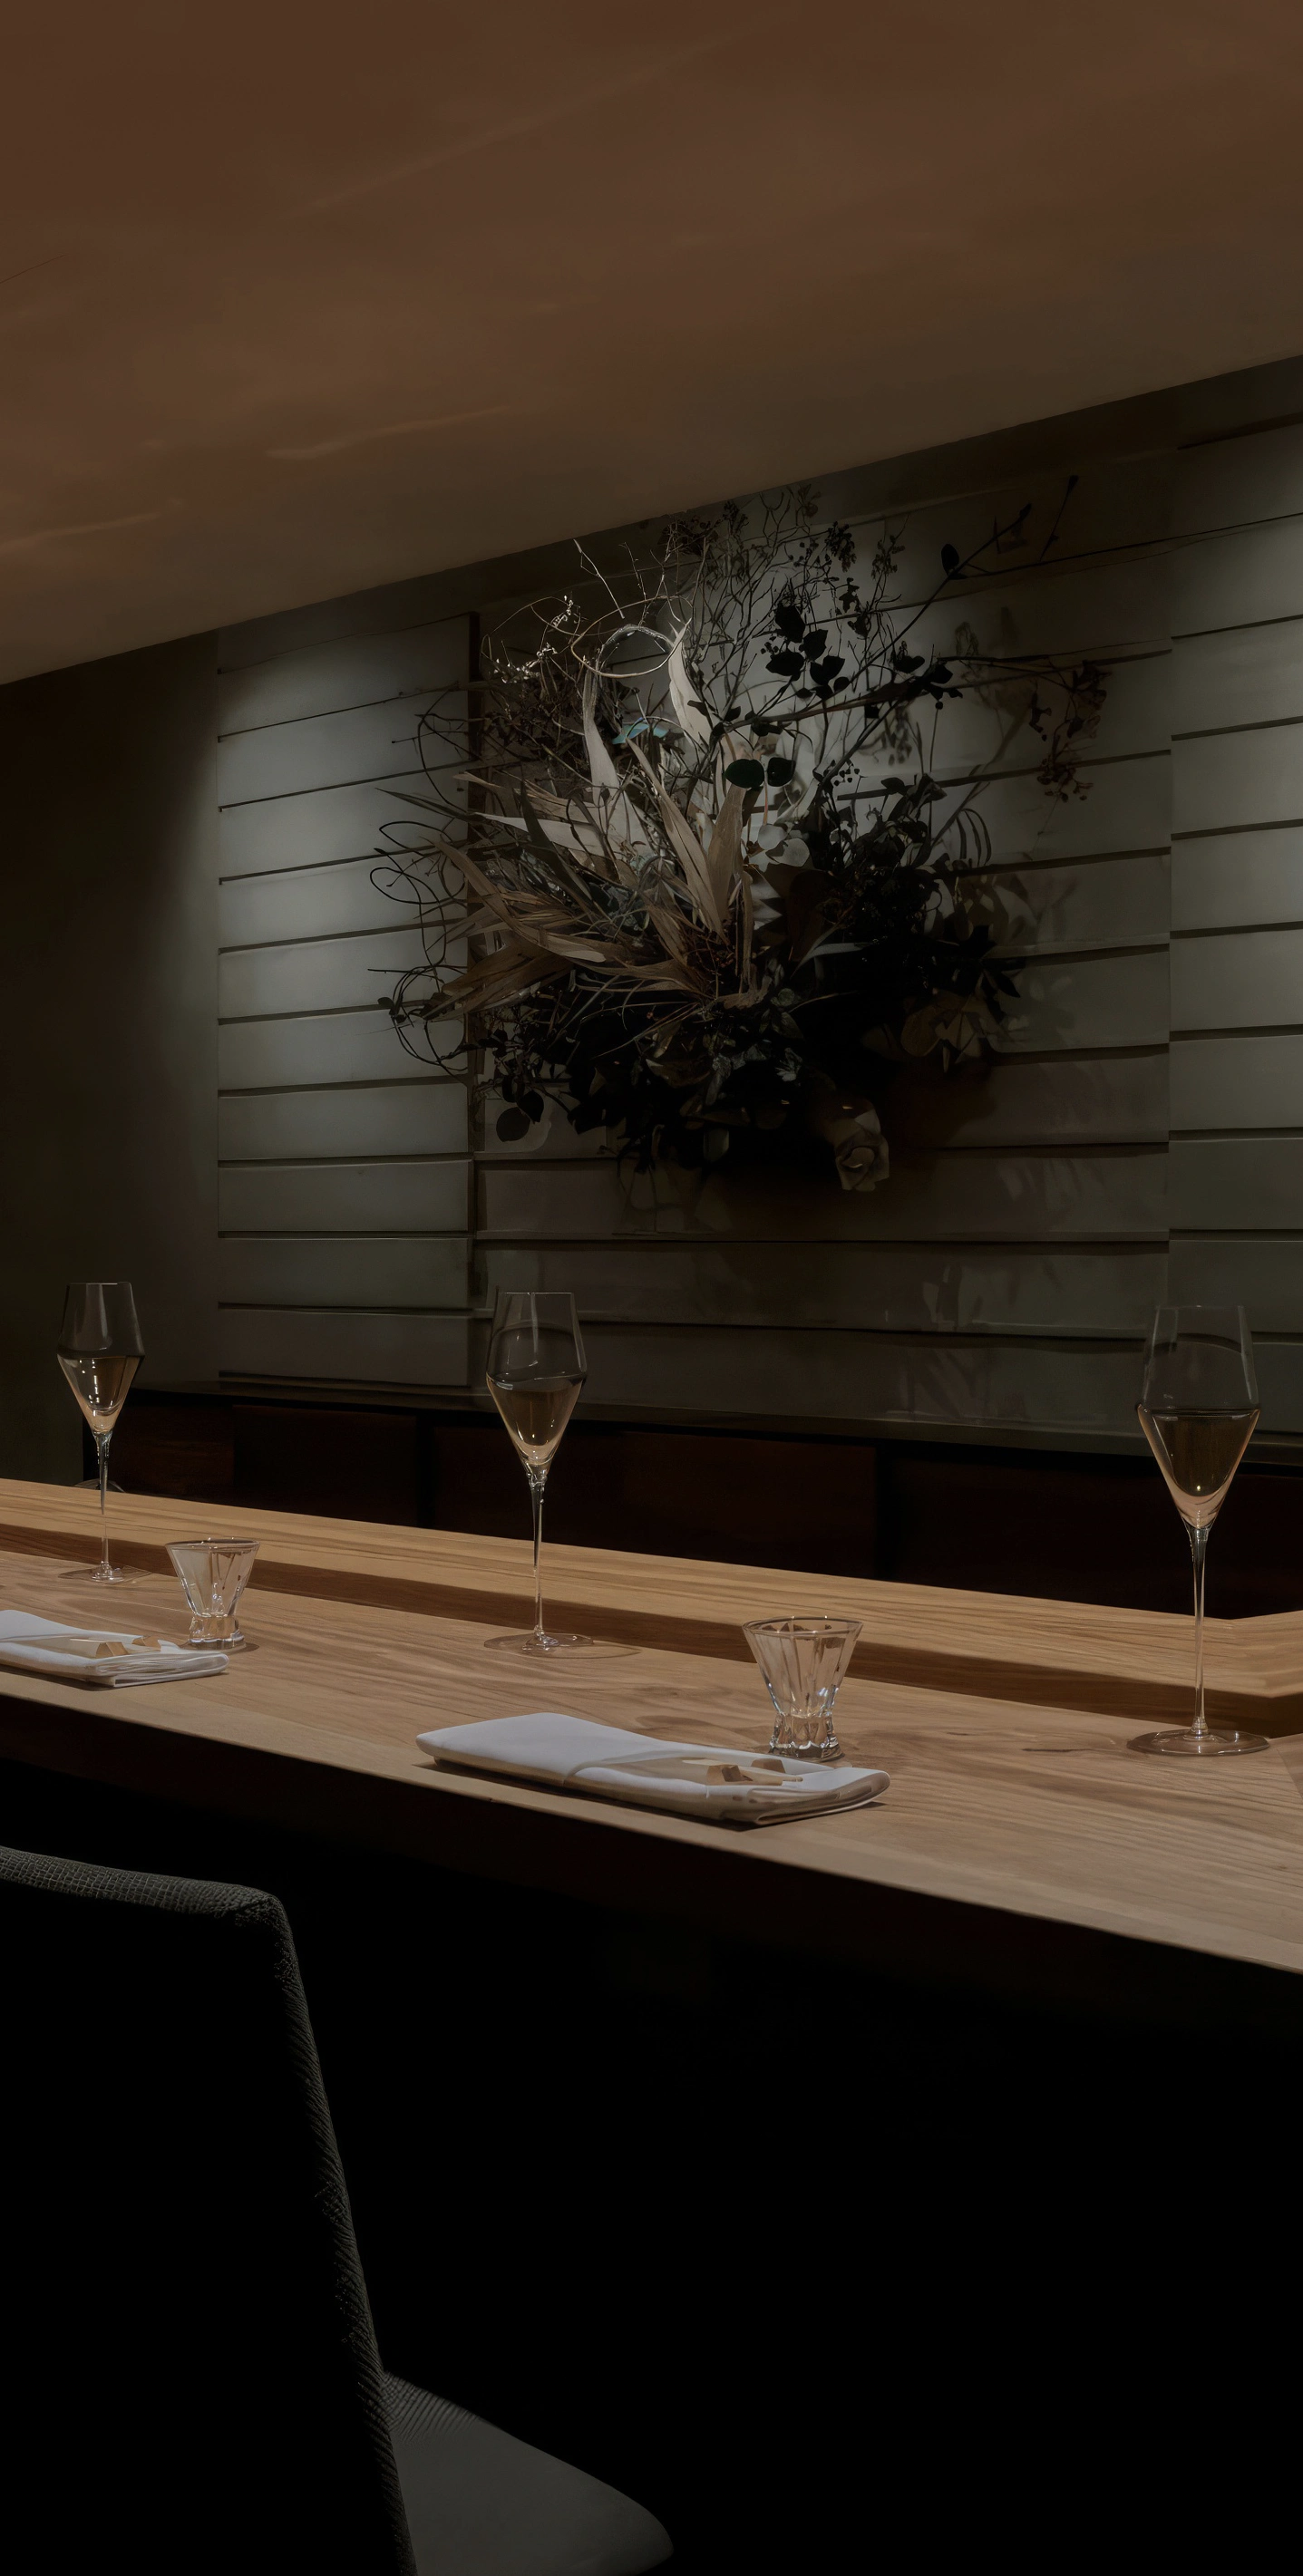 An image of the wooden sushi bar with minimalist design ready to serve guests at the restaurant ITO in New York City.